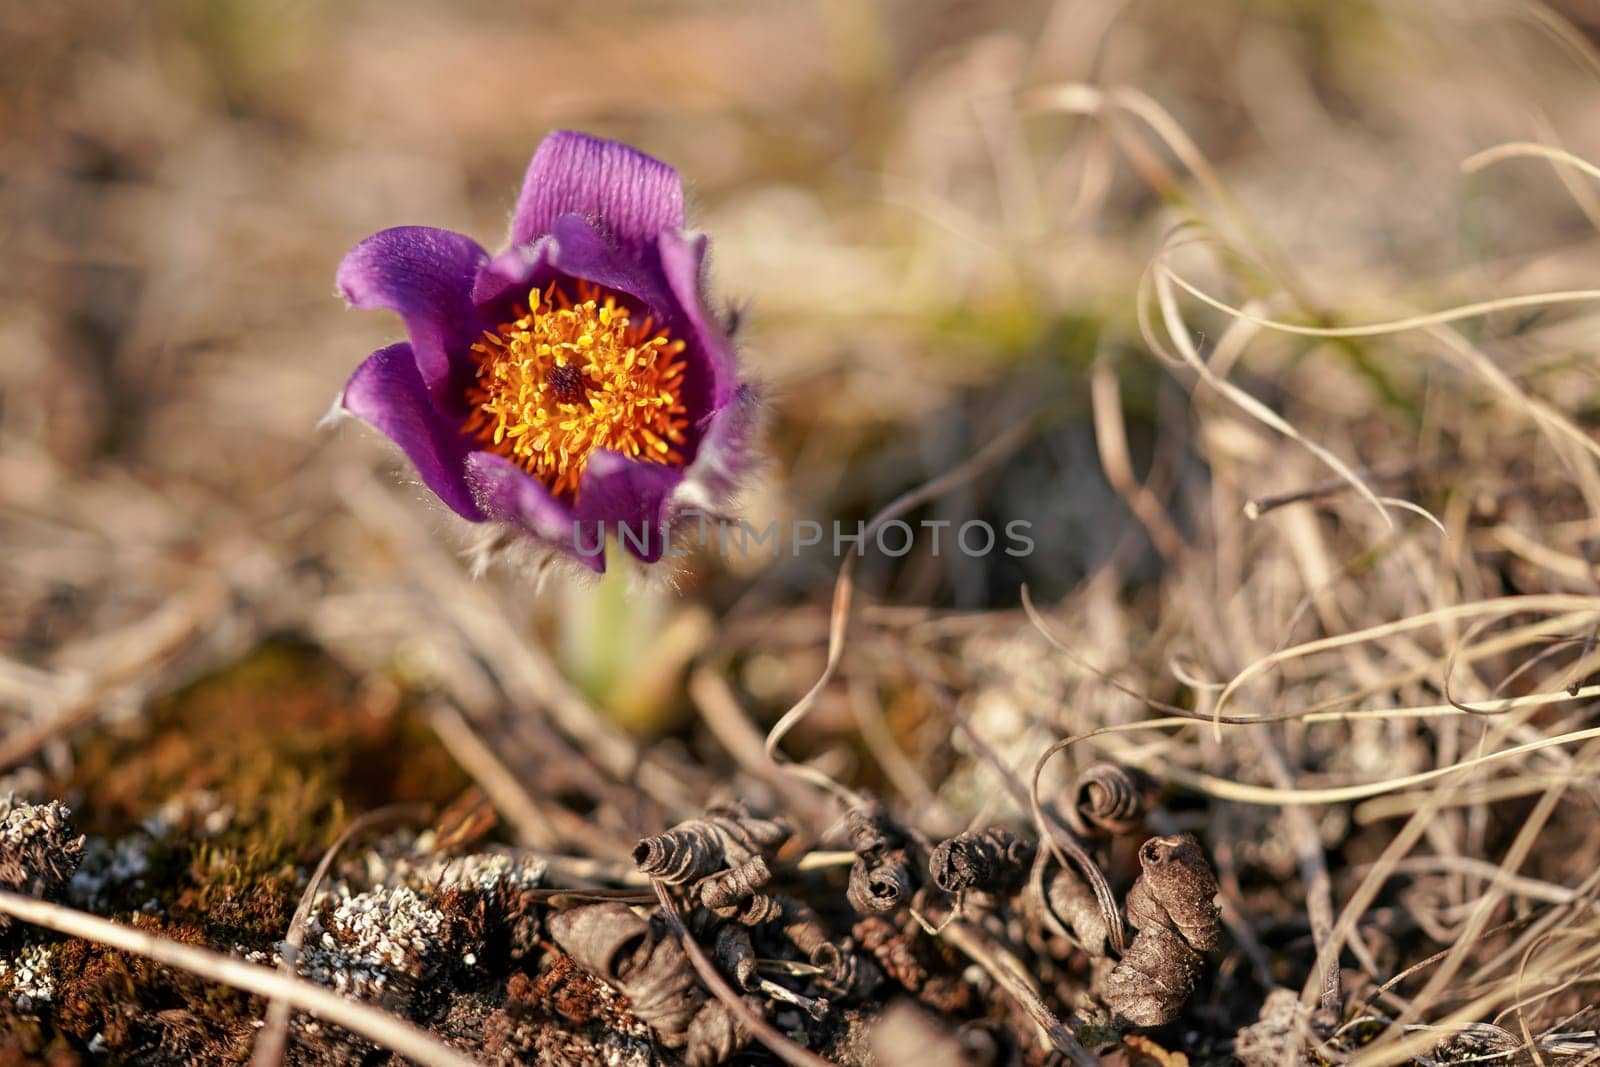 Purple greater pasque flower - Pulsatilla grandis - growing in dry grass, close up detail on yellow head center by Ivanko